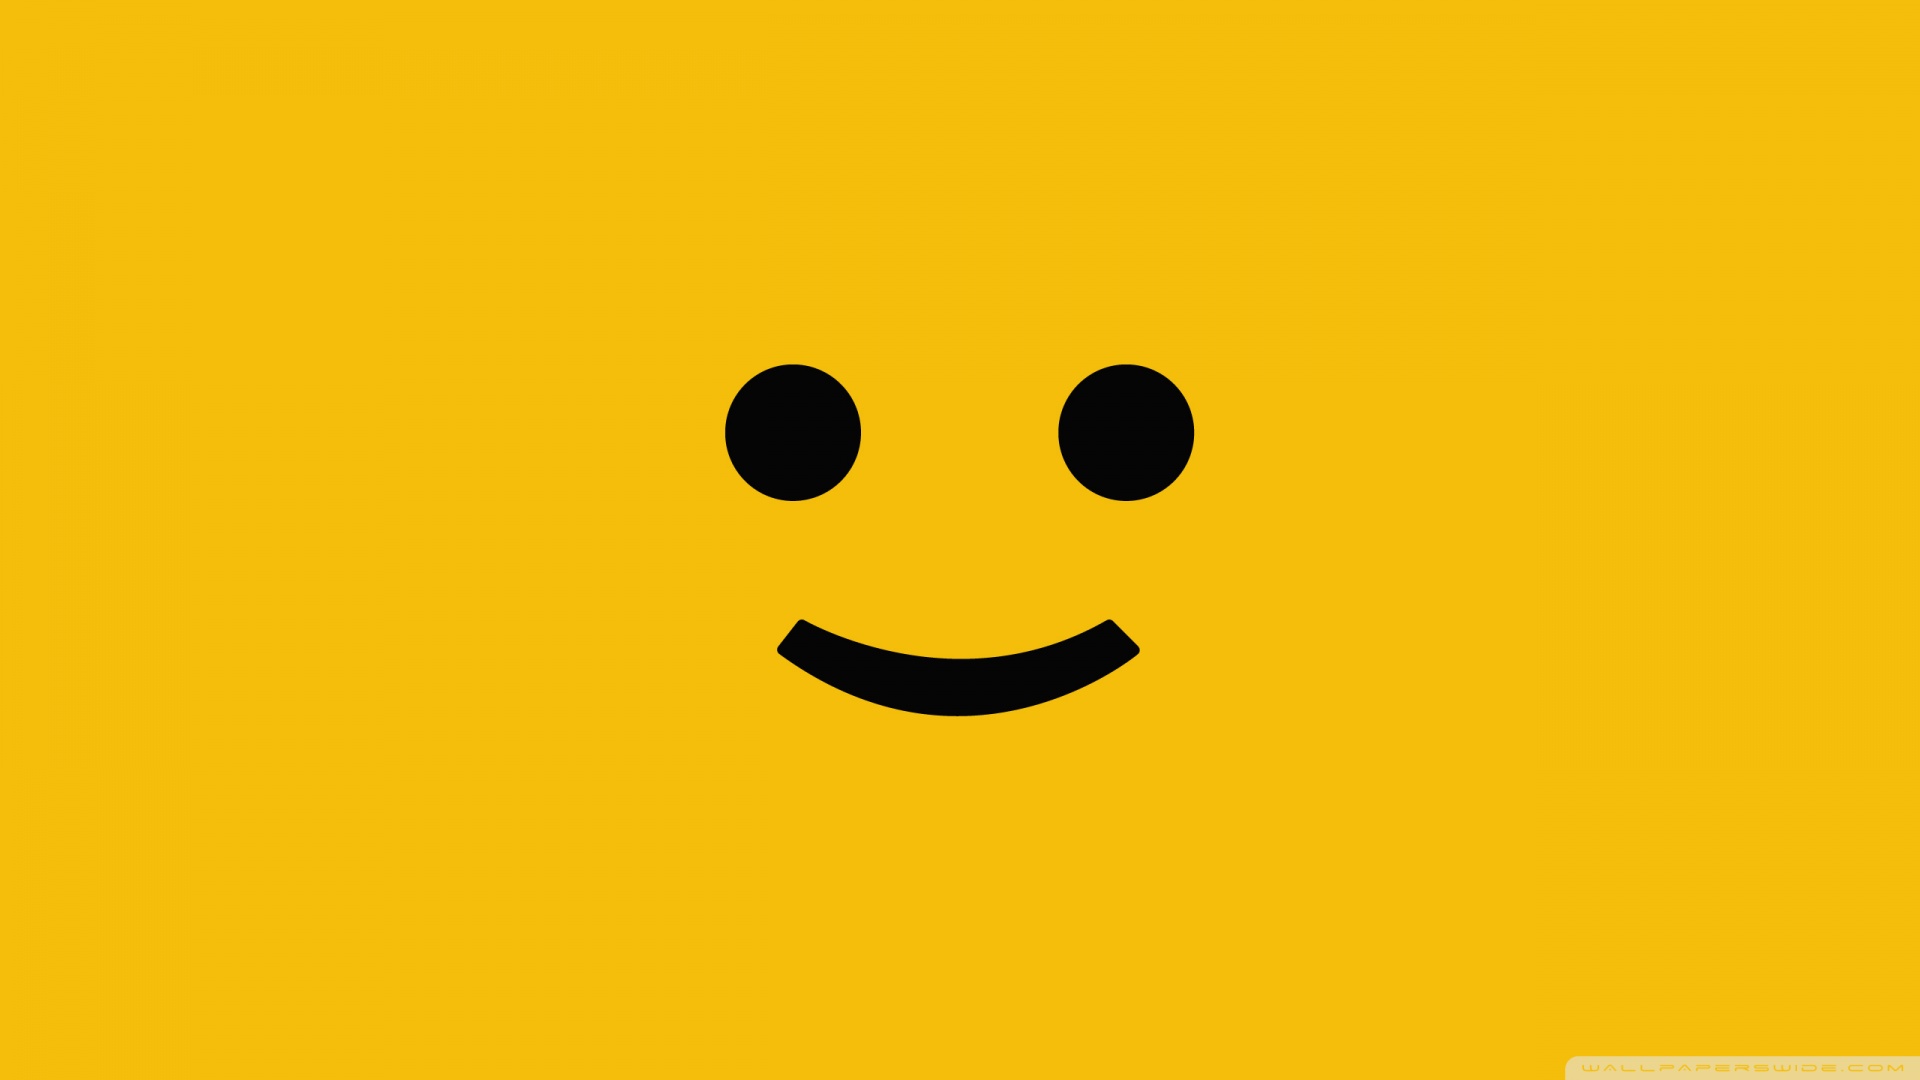 Download Smiley Face Background Wallpaper 1920x1080